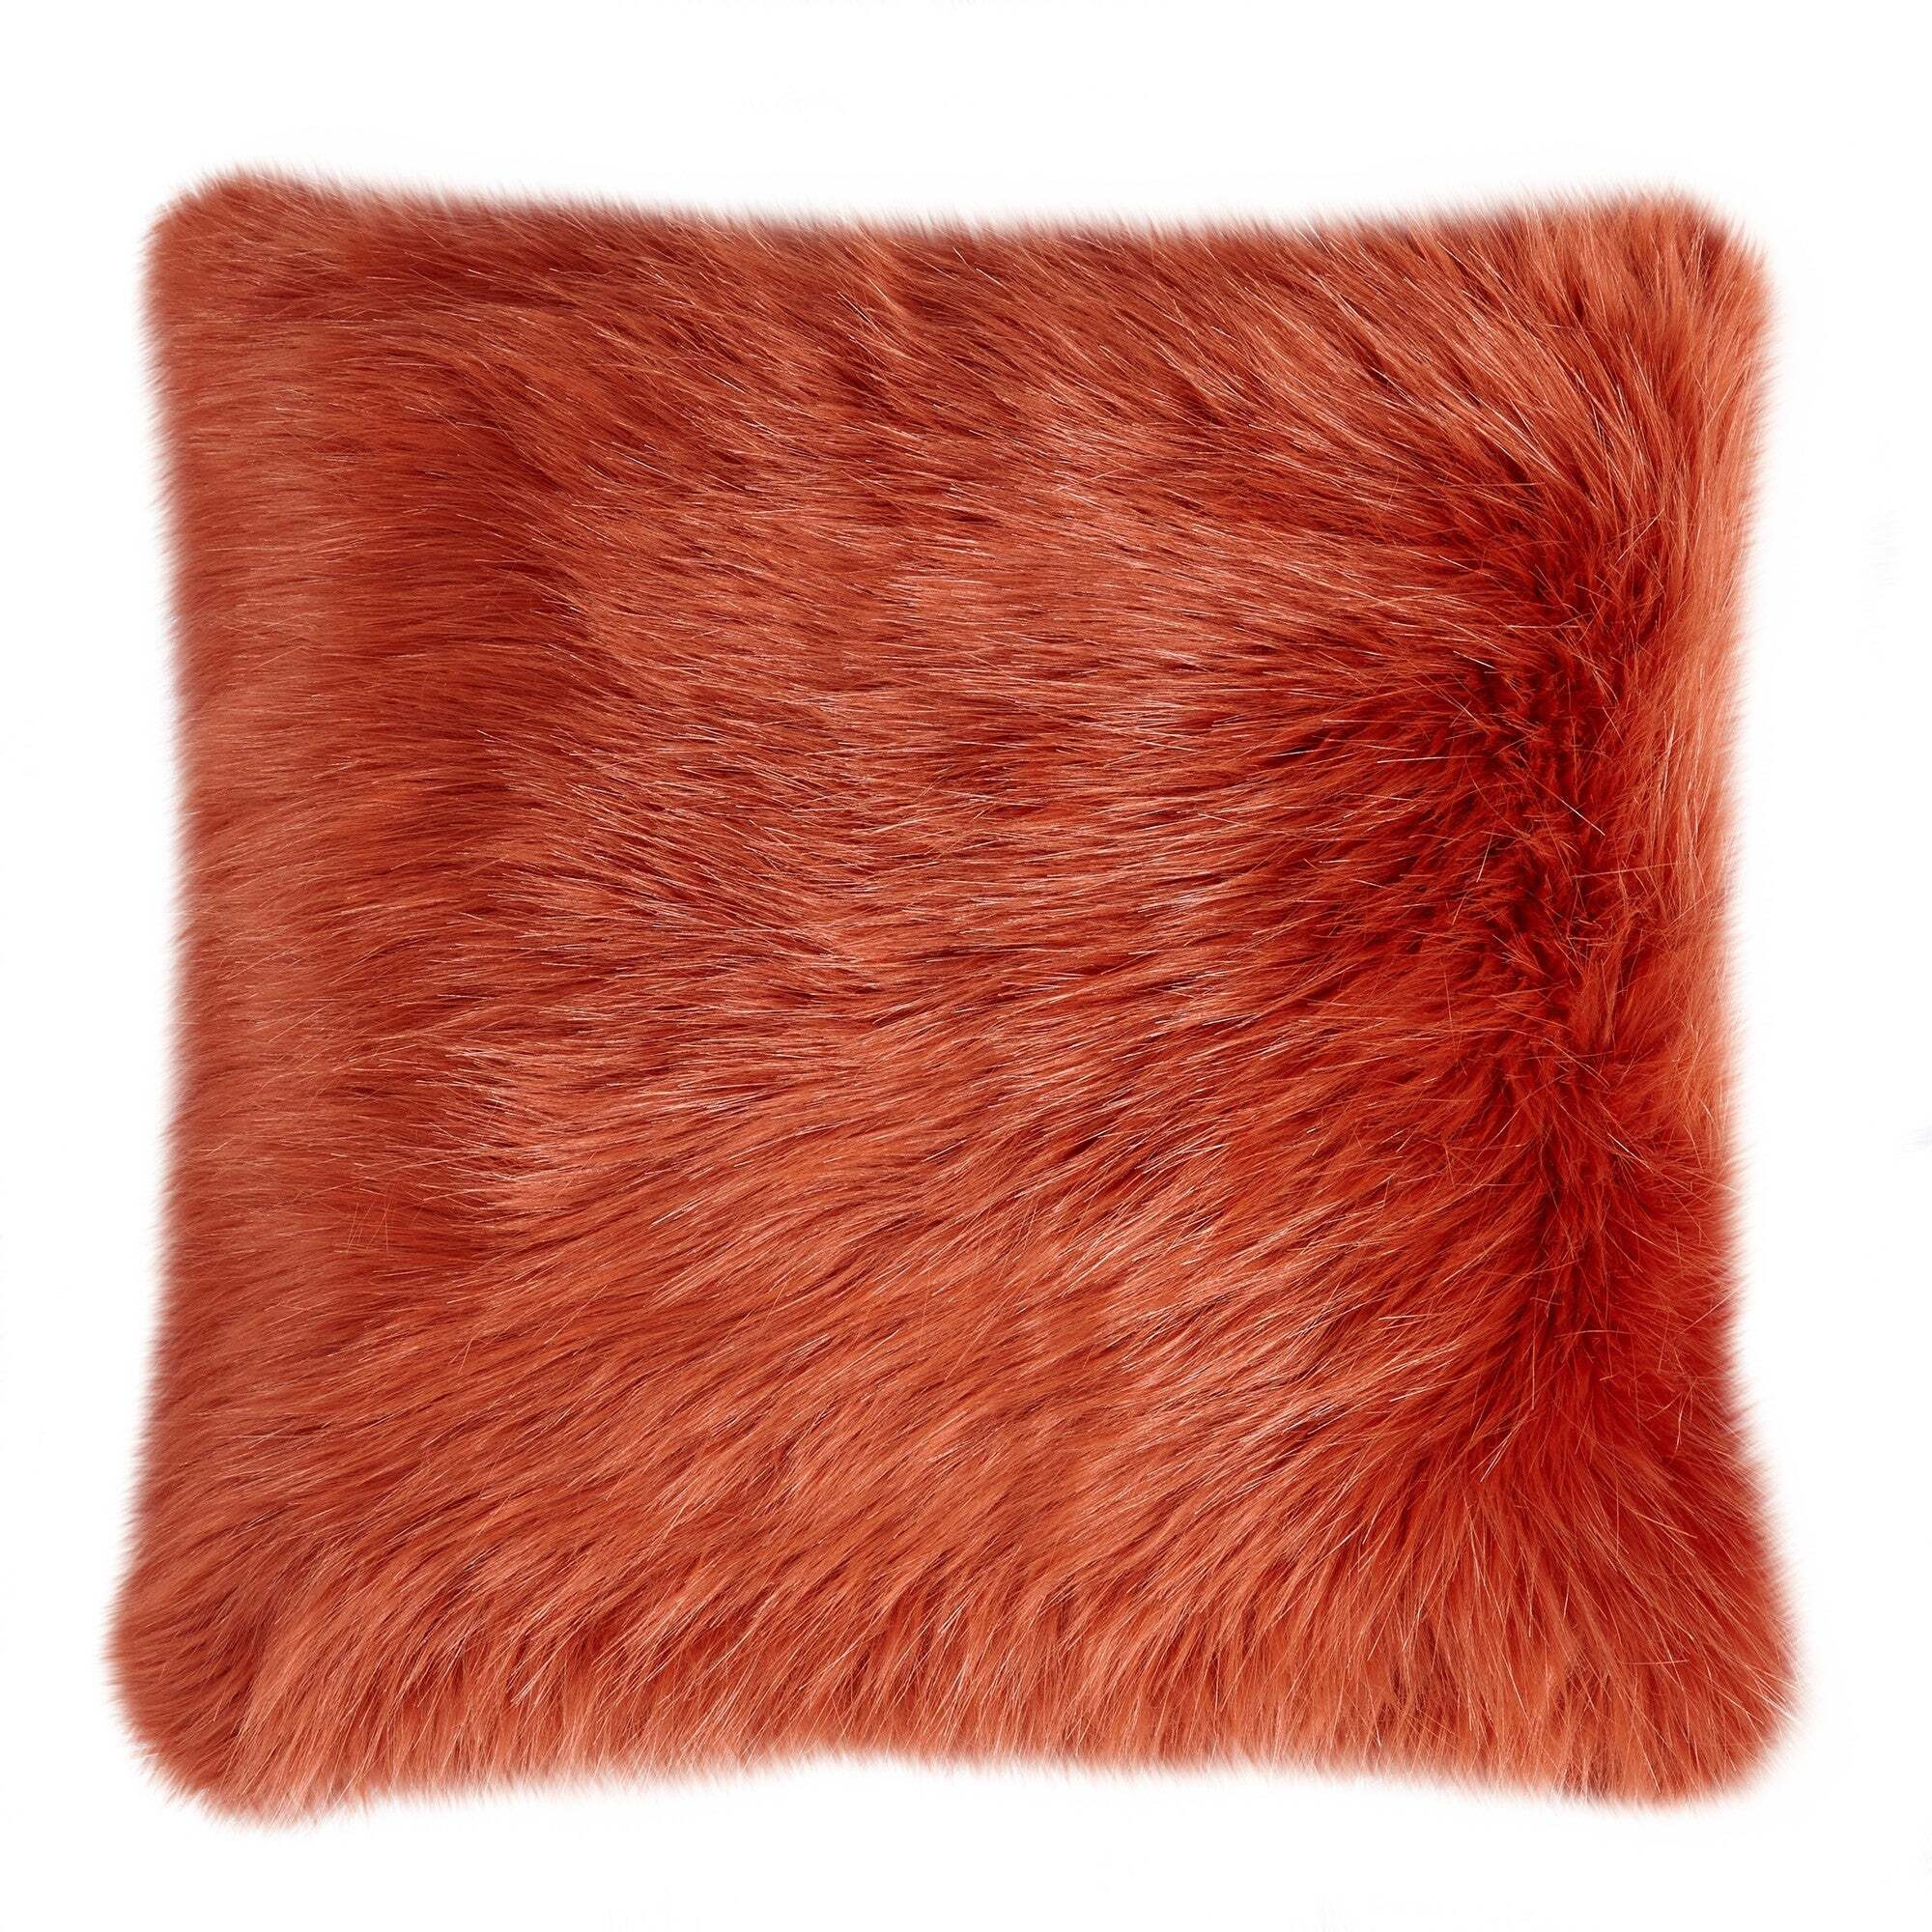 Fluffy Faux Fur Cushion Cover Red